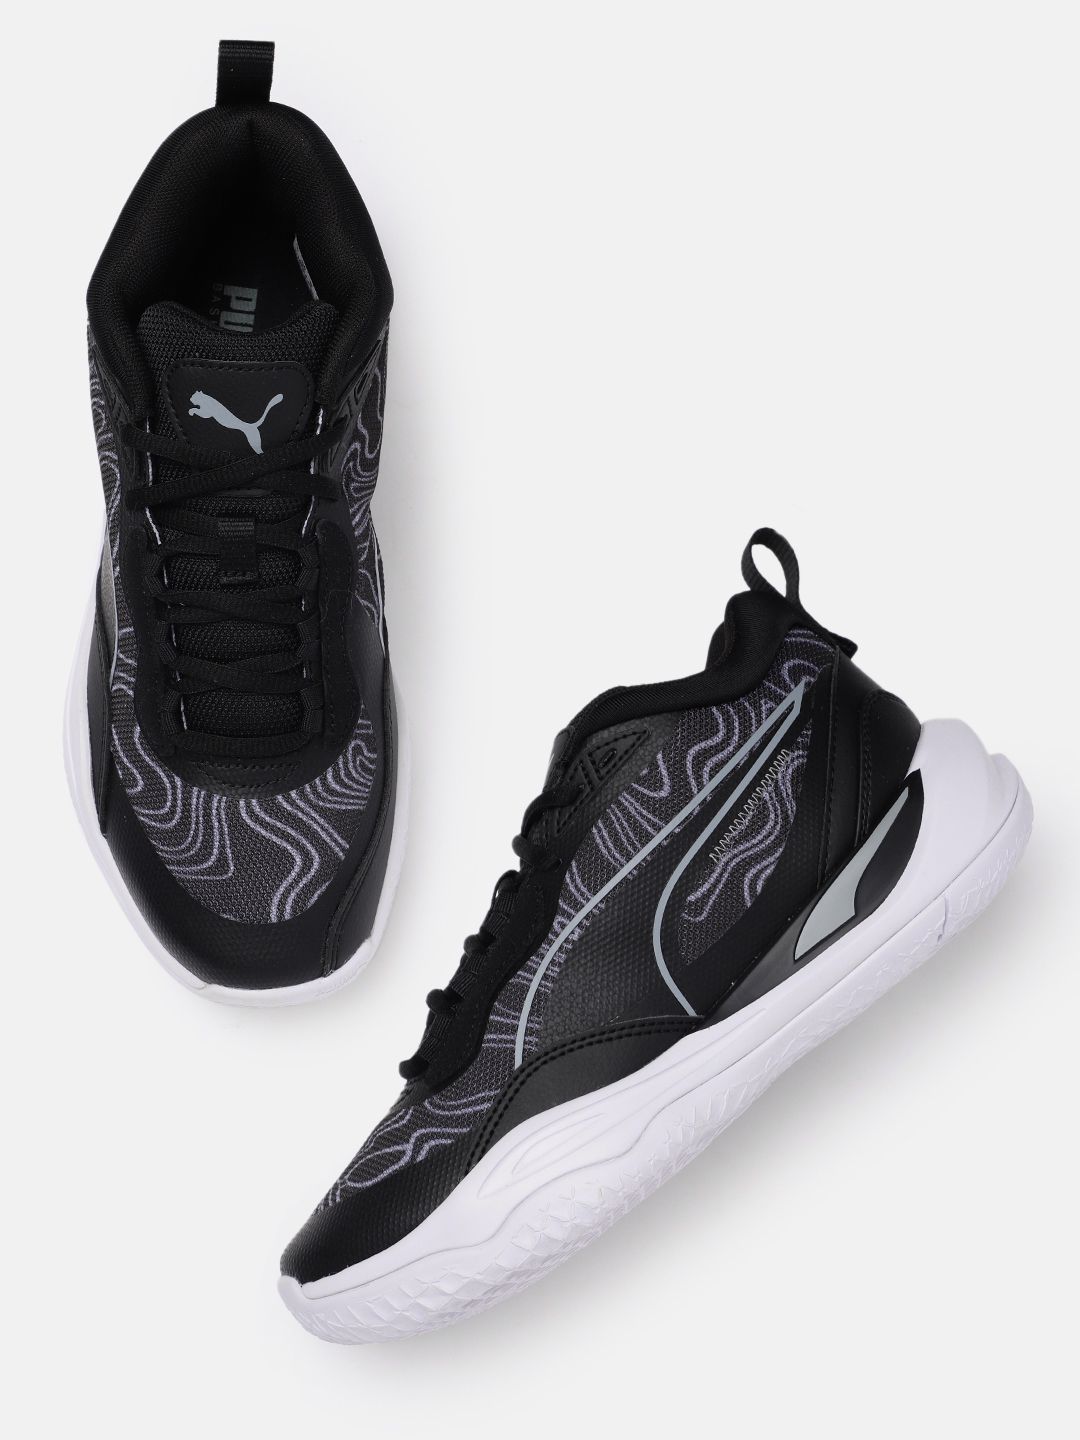 Puma Unisex Playmaker Pro Lava Basketball Shoes Price in India